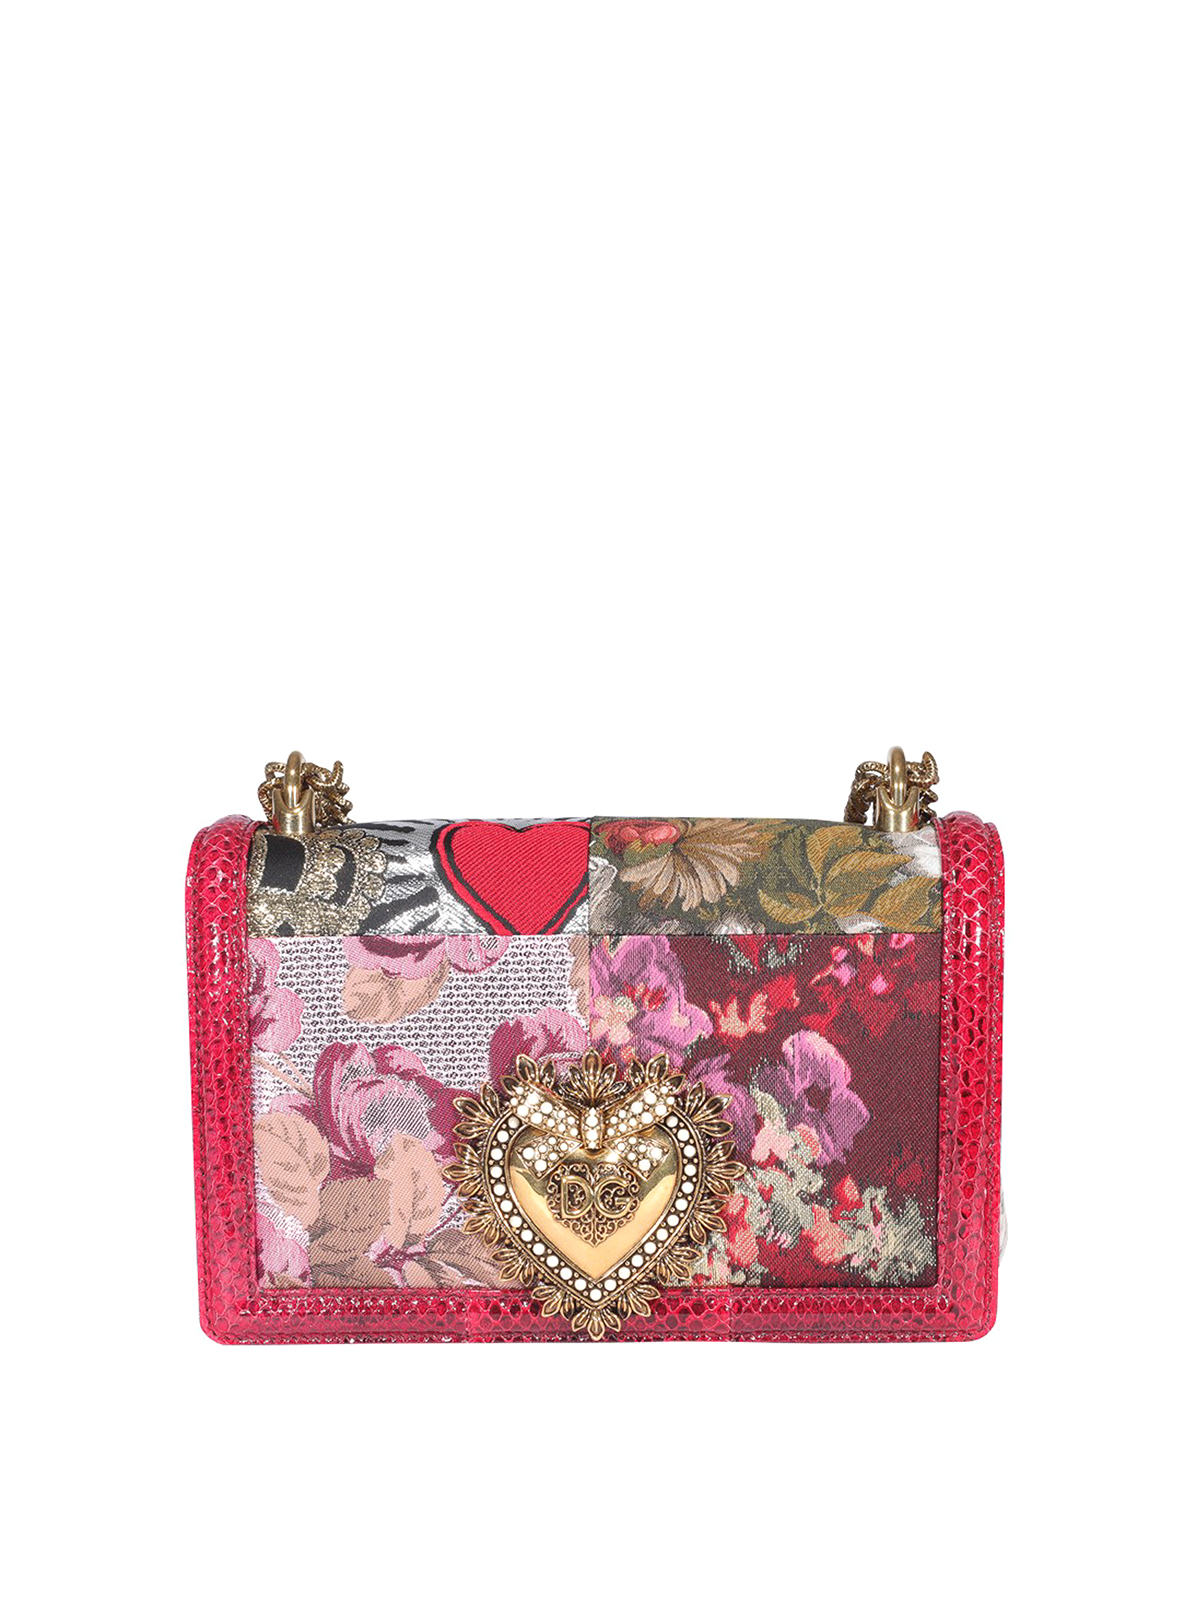 Dolce & Gabbana Devotion Floral Printed Bag In Red